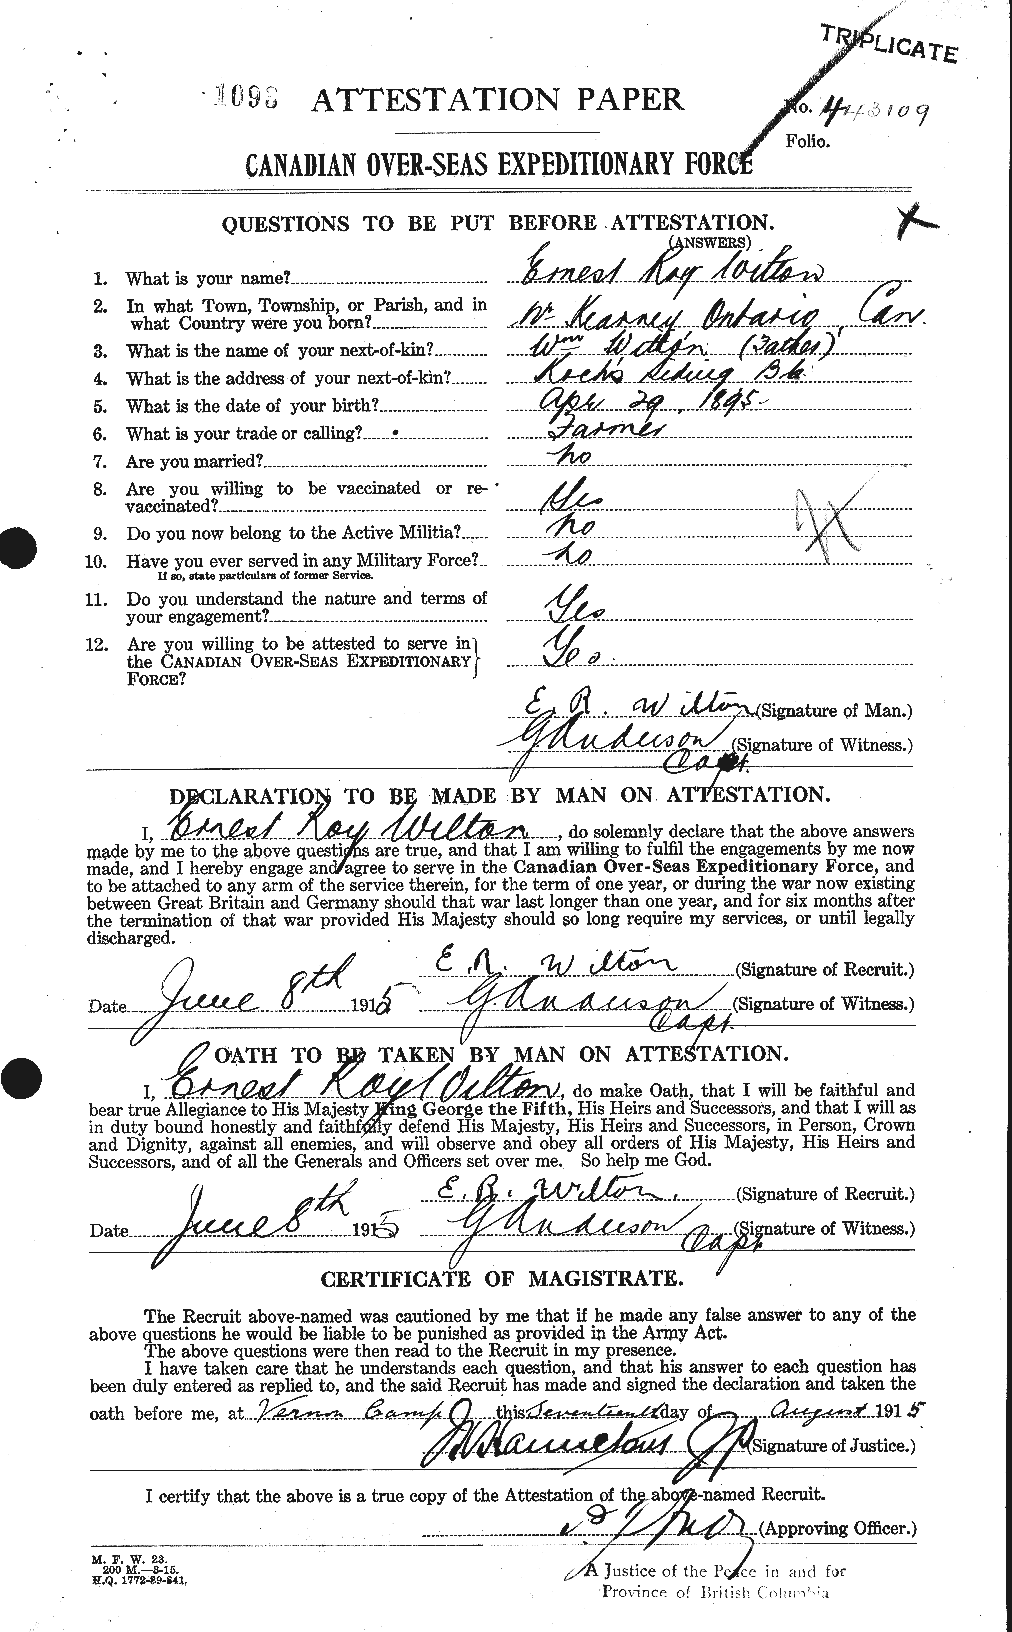 Personnel Records of the First World War - CEF 684148a